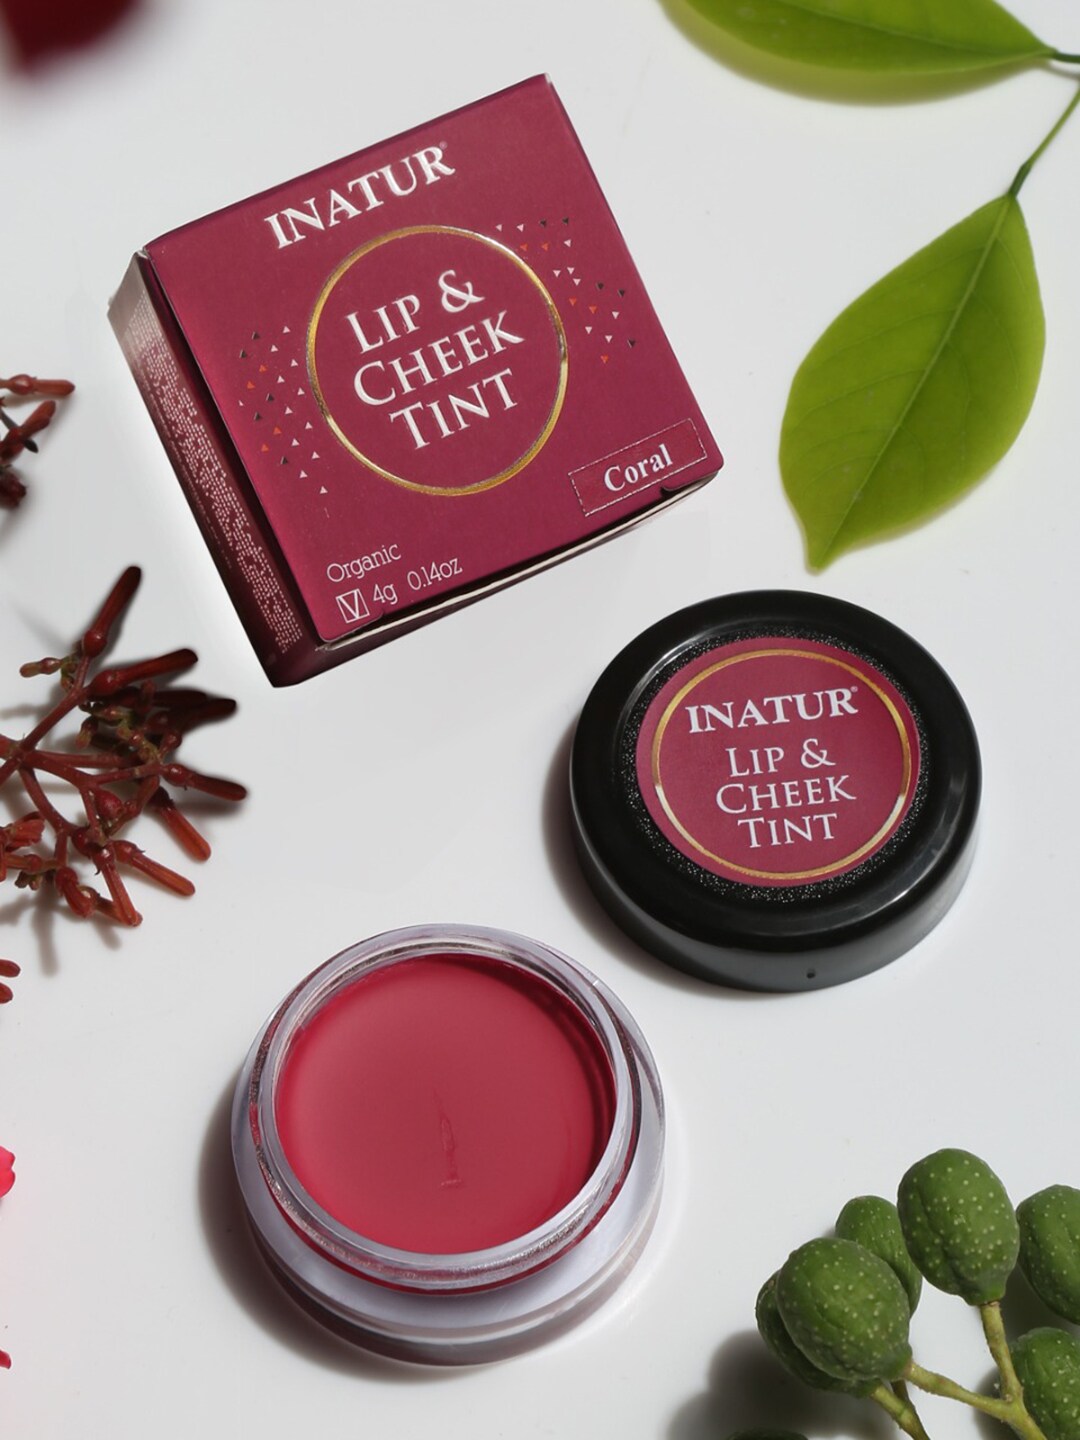 Inatur Lip & Cheek Tint 4 g - Coral Price in India